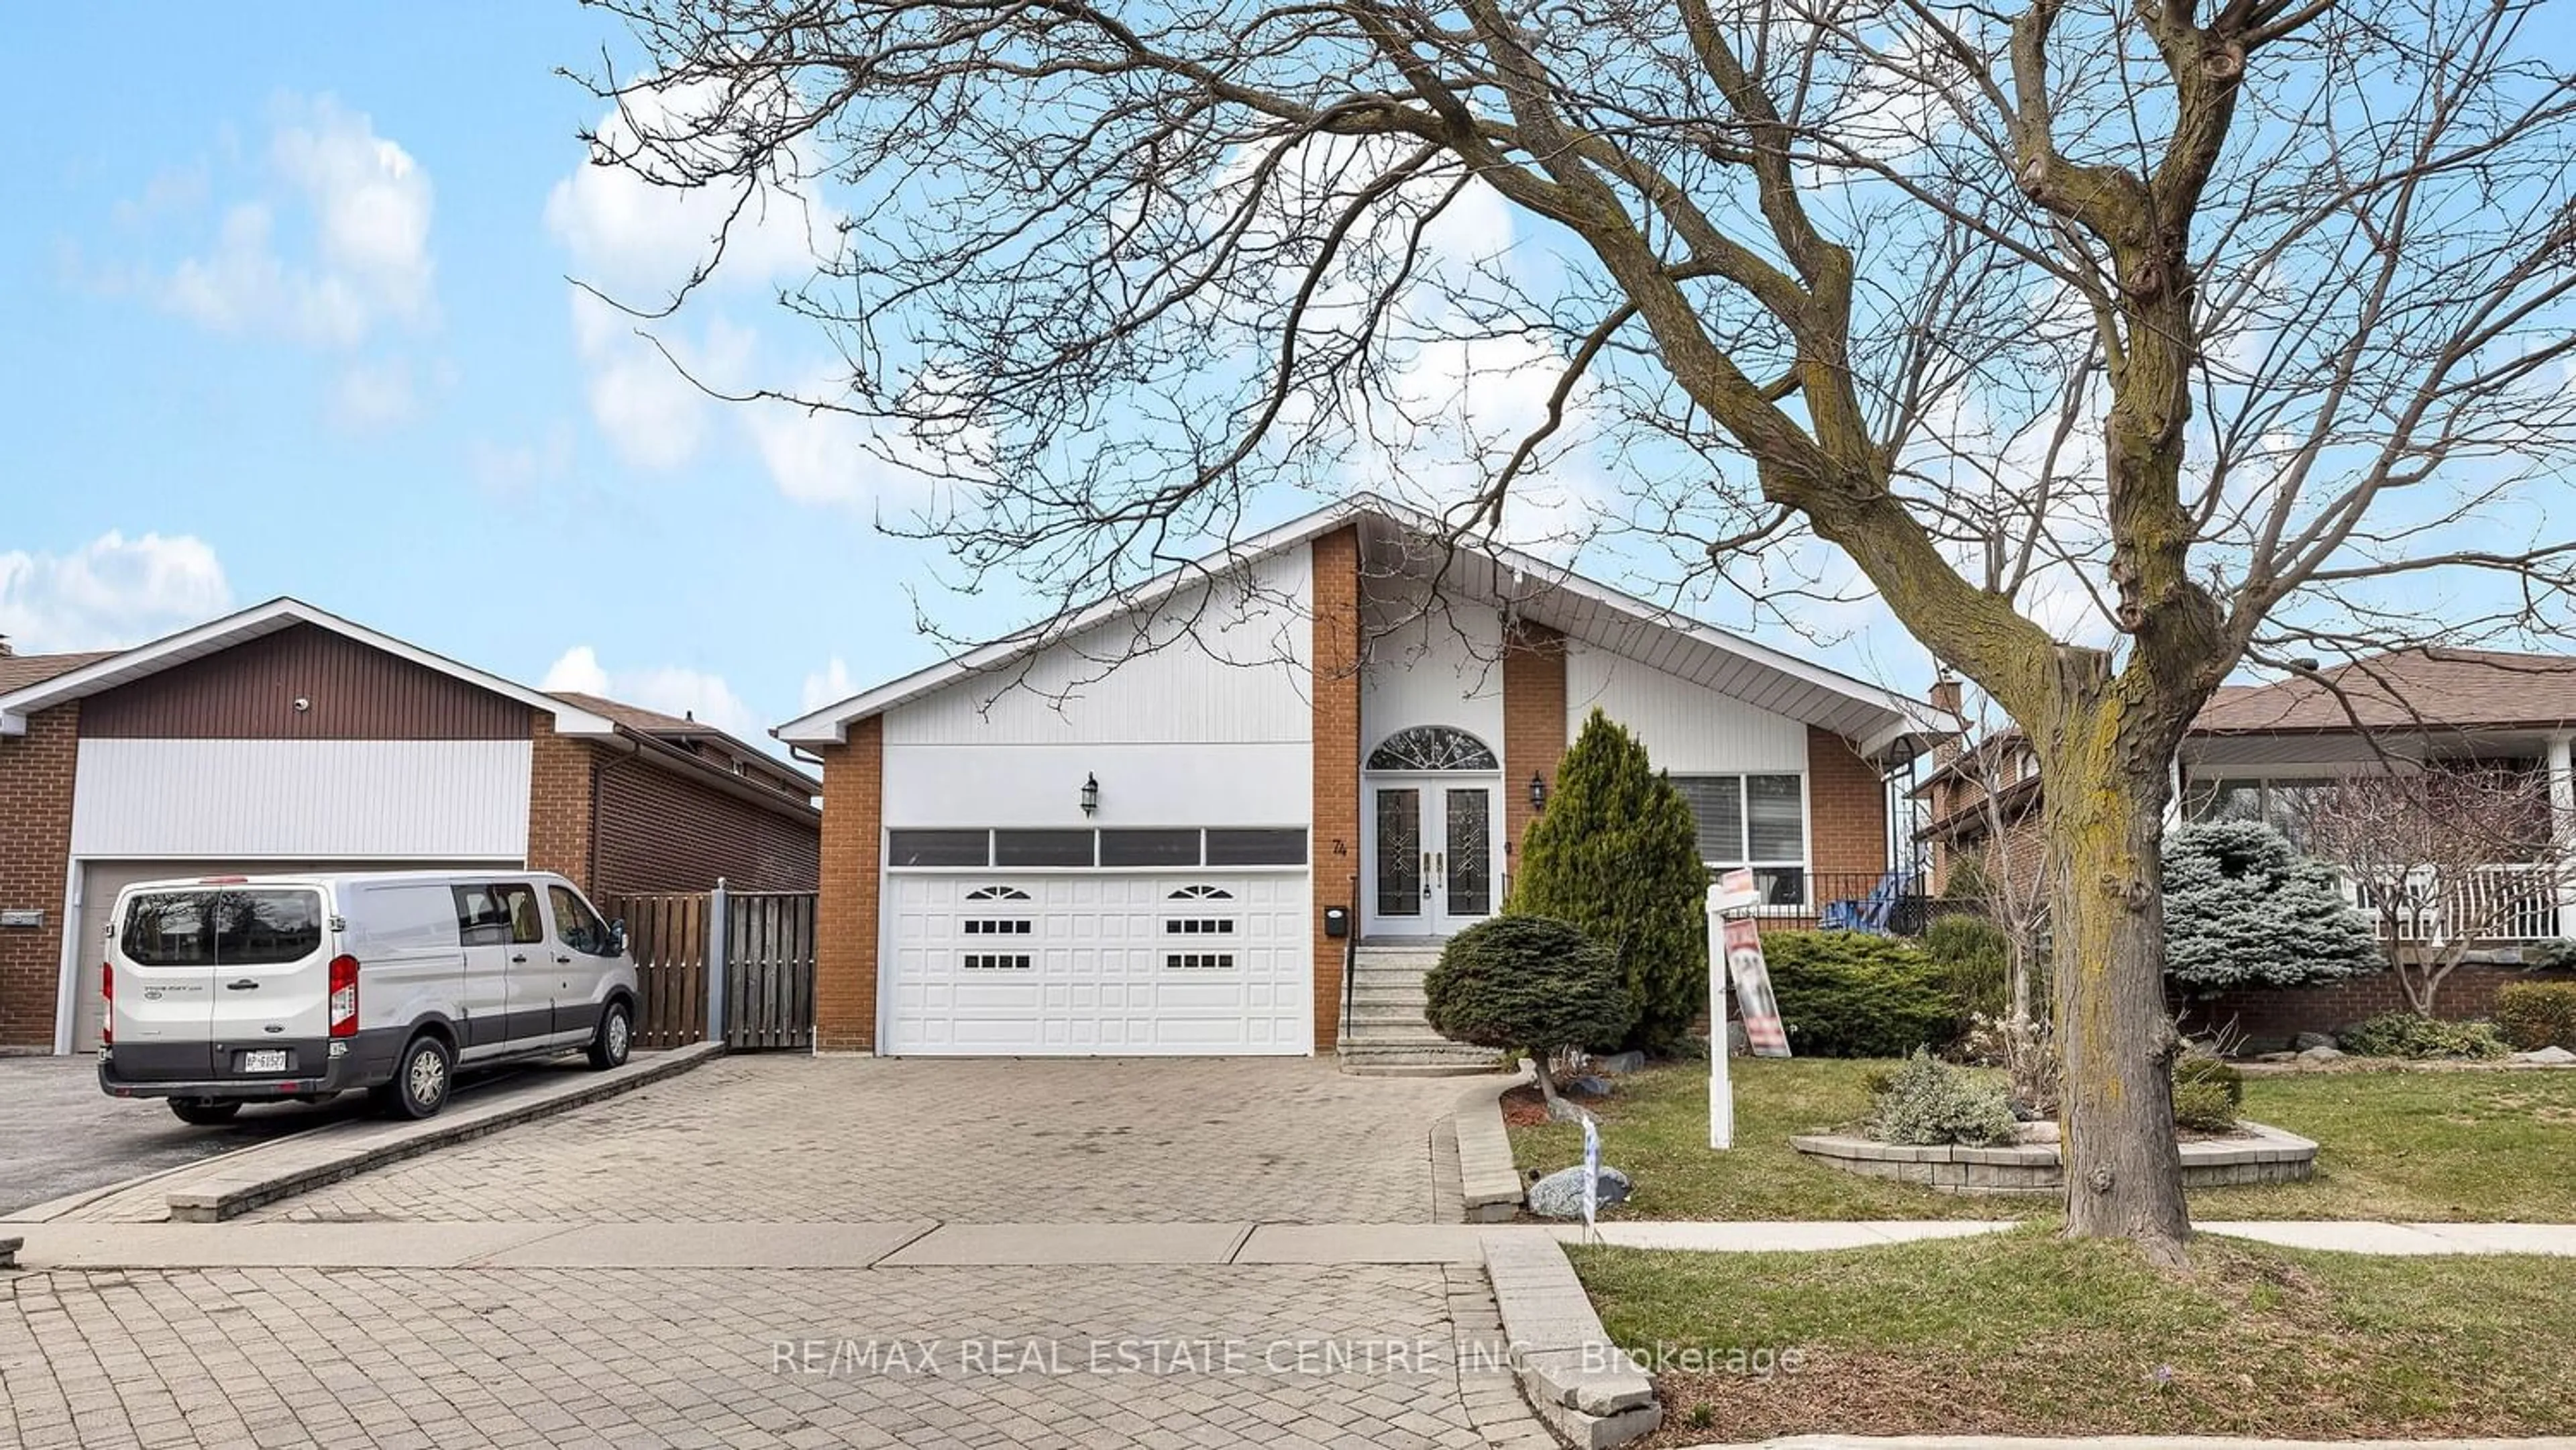 Frontside or backside of a home for 74 Massey St, Brampton Ontario L6S 2W5